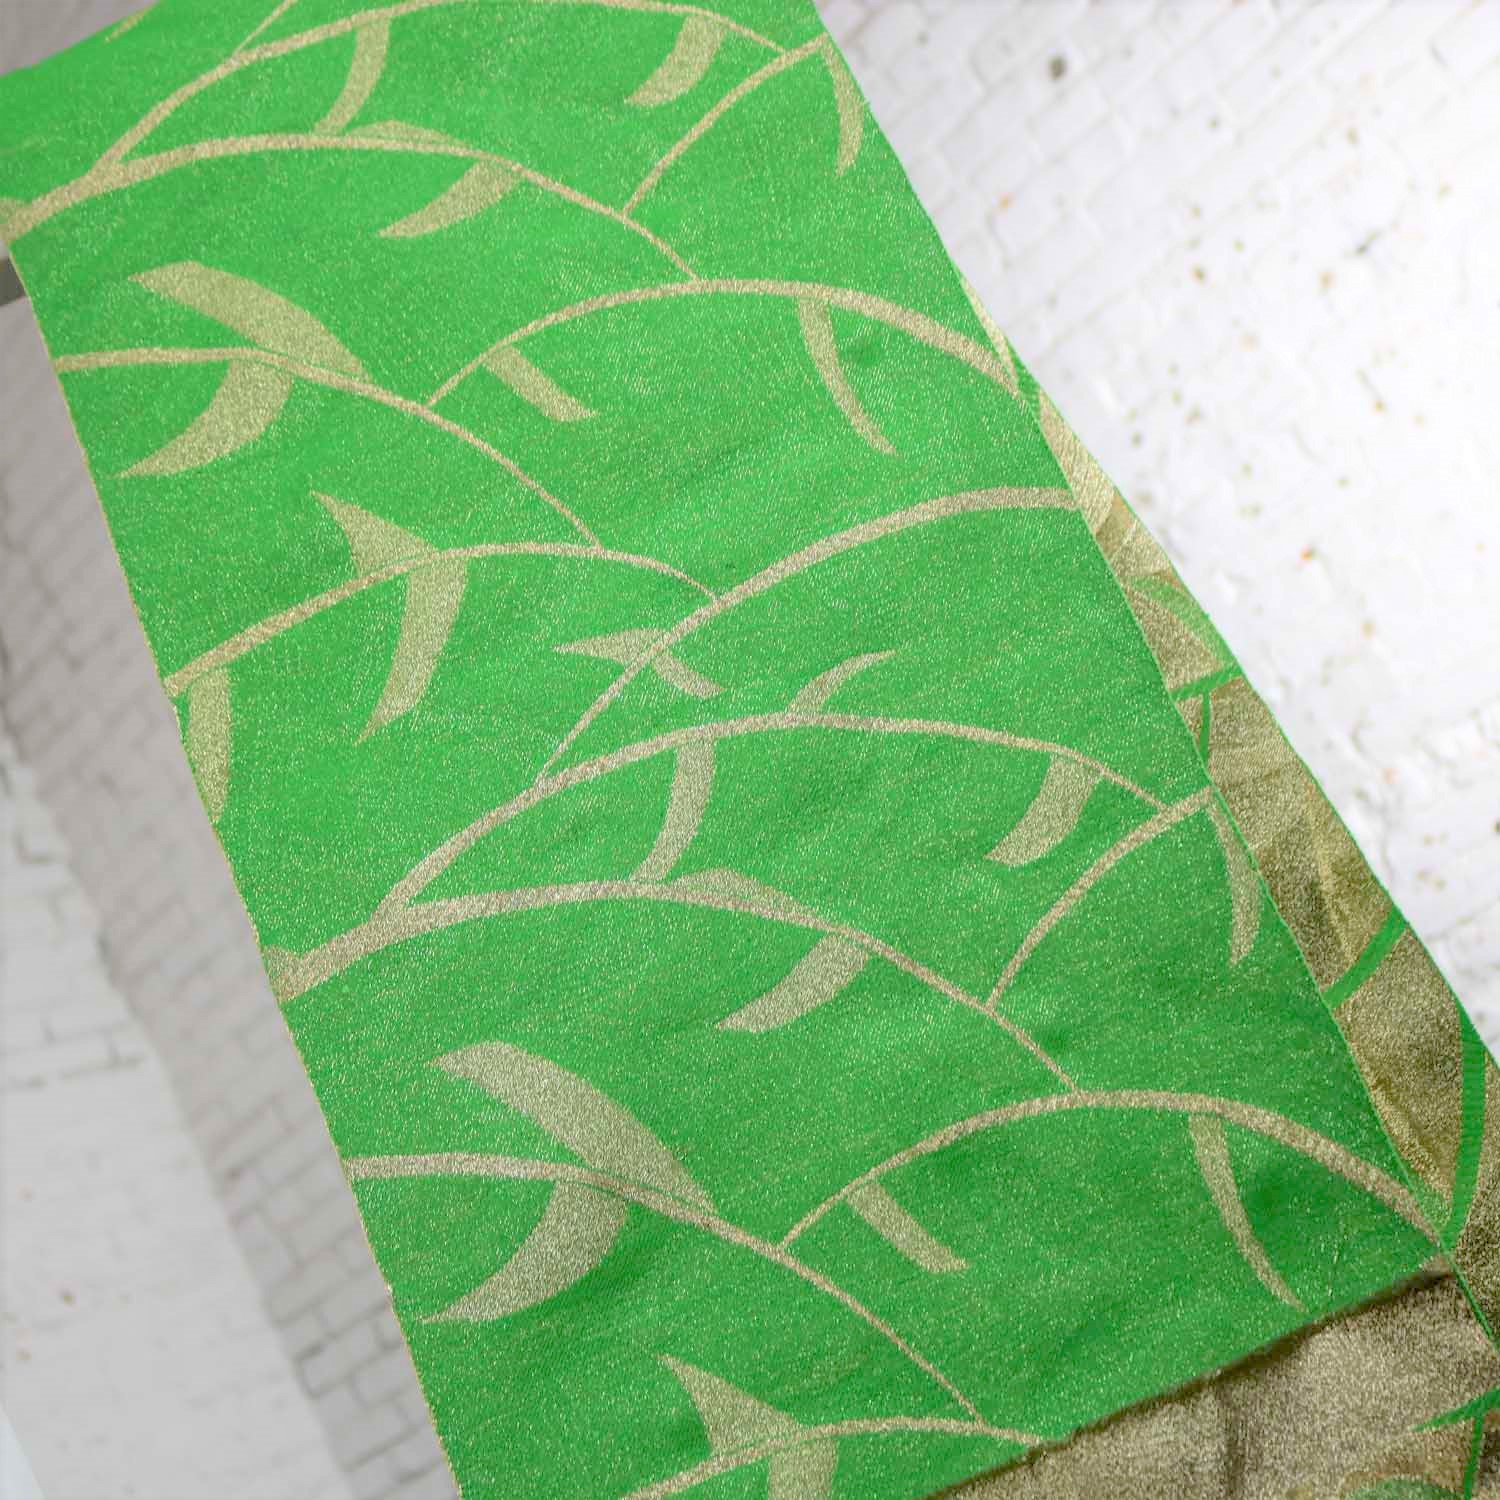 Vintage Emerald Green and Gold Lame Japanese Obi with Geometric Leaf Design